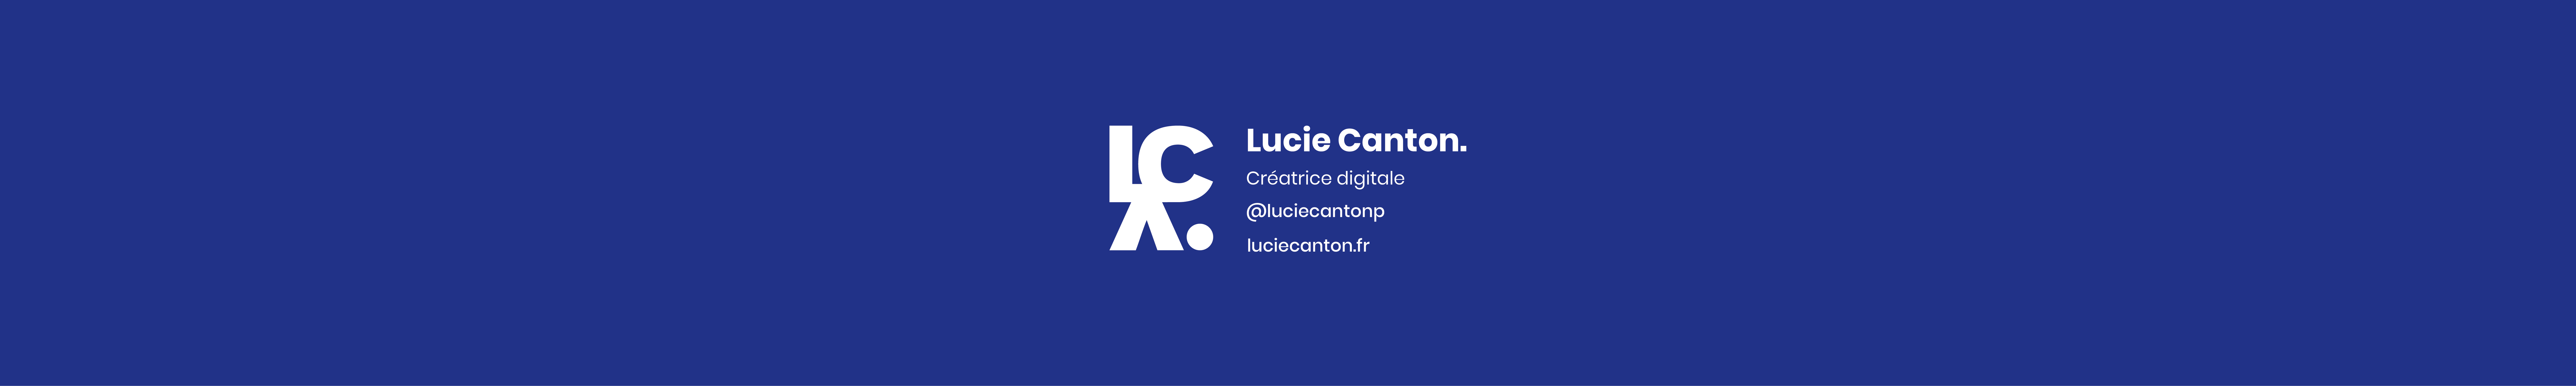 Lucie CANTON's profile banner